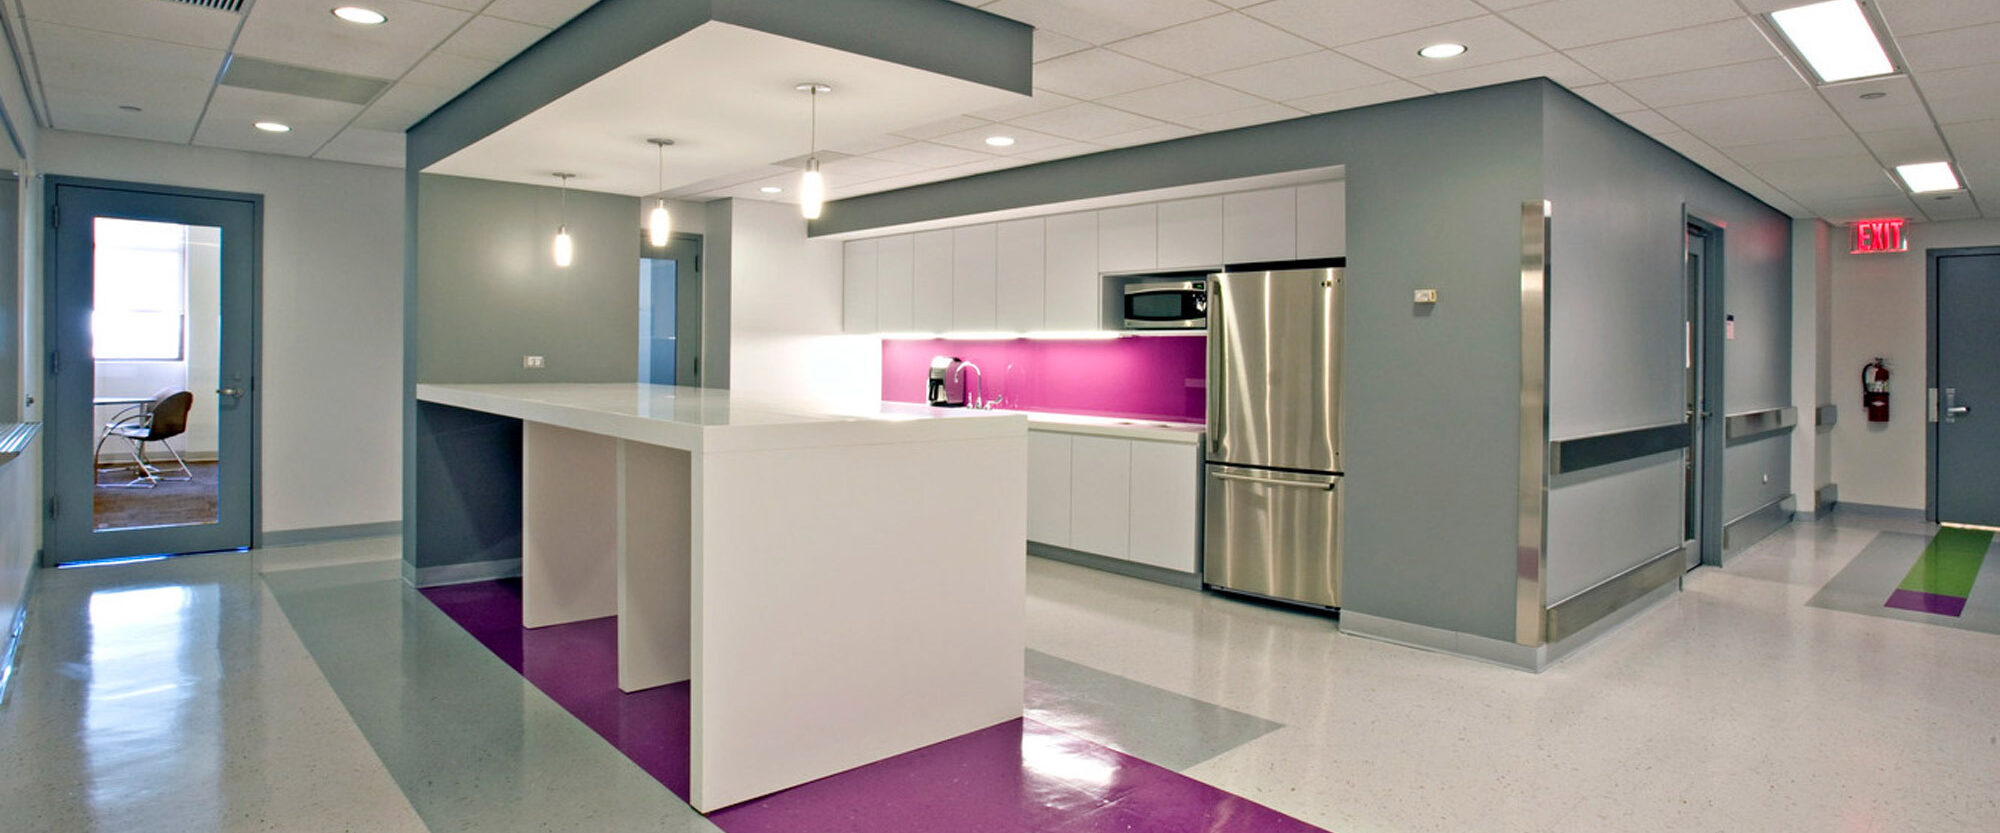 Modern interior with geometric design elements, featuring a neutral palette with pops of green and purple on the flooring. Clean lines and well-lit spaces emphasize functionality and contemporary style.